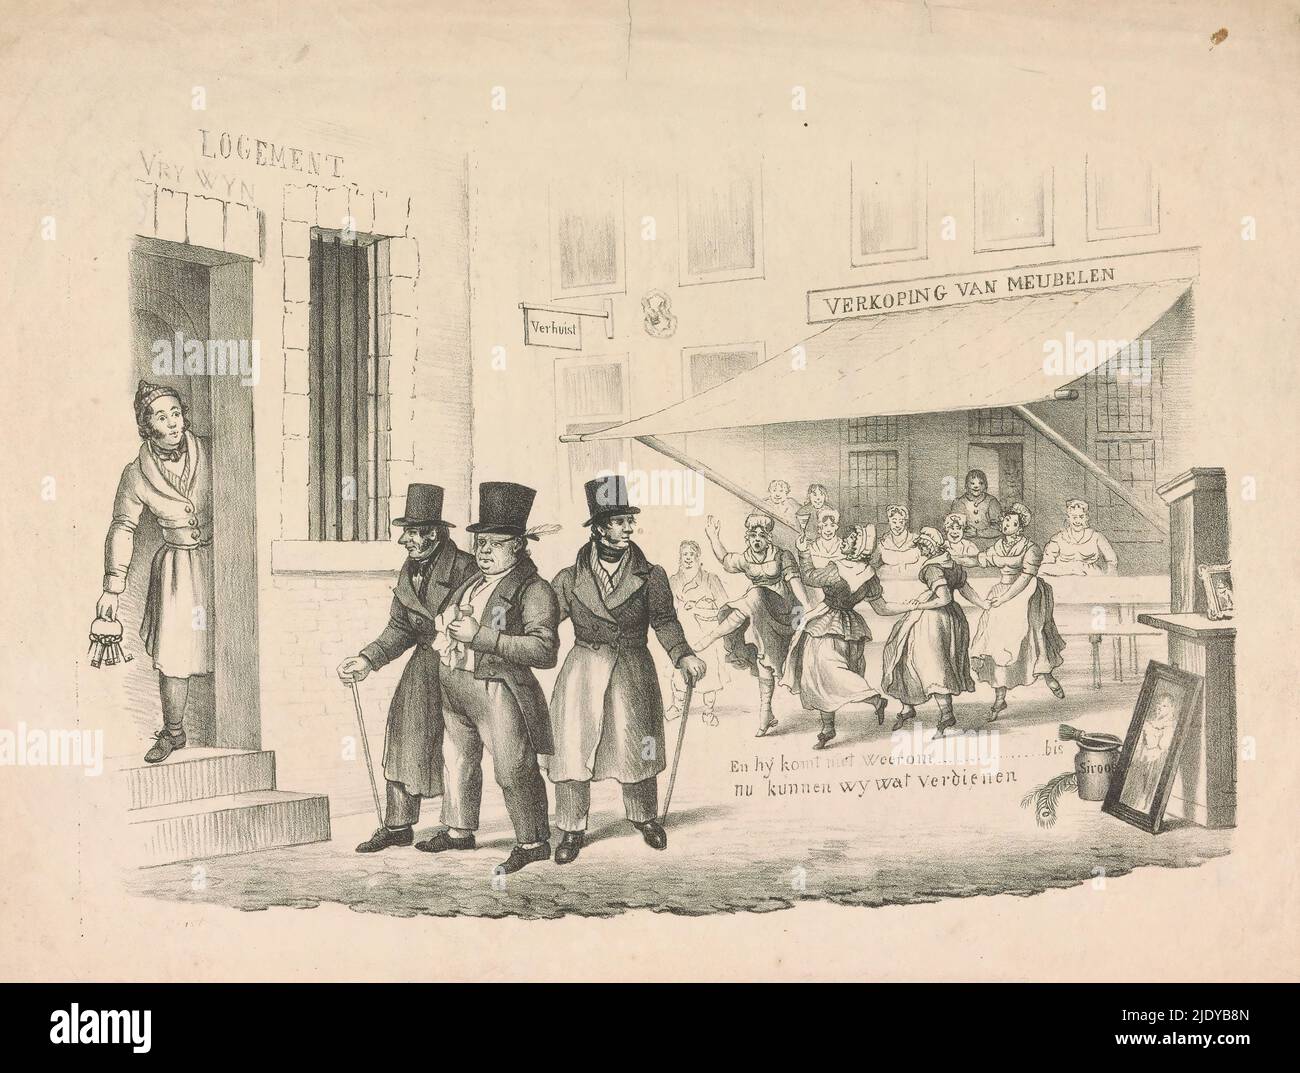 Cartoon on C. Seyn, 1838-1839, Cartoon on the Leiden clerk C. Seyn being led to prison by two constables. In the background a vendu house for furniture where a group of women are singing and dancing with joy over the arrest. For the benefit of his hobby (paintings) Seyn stole from the city treasury. On the right some paintings leaning against a cabinet, a jar of syrup and a peacock feather. The theft was discovered on 10 October 1838, the sentence pronounced on 27 September 1839., print maker: anonymous, Leiden, 1838 - 1839, paper, height 312 mm × width 413 mm Stock Photo